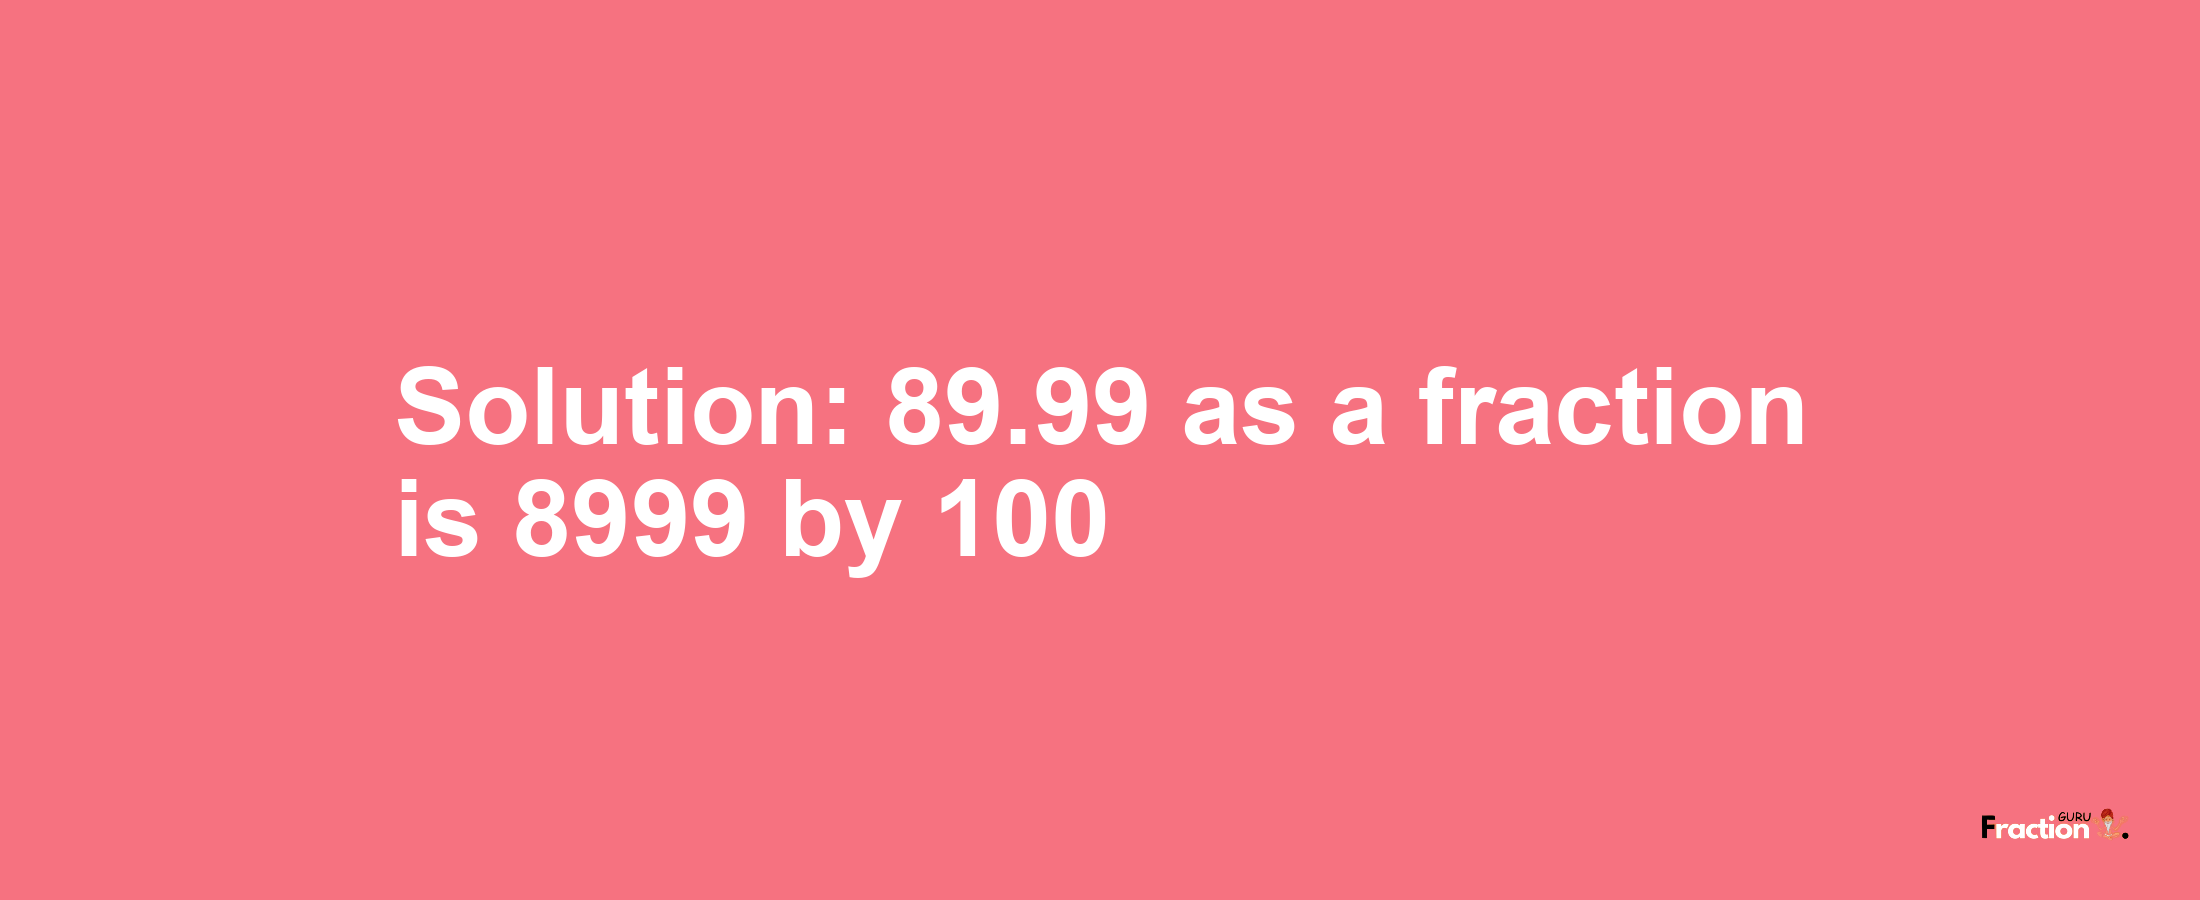 Solution:89.99 as a fraction is 8999/100